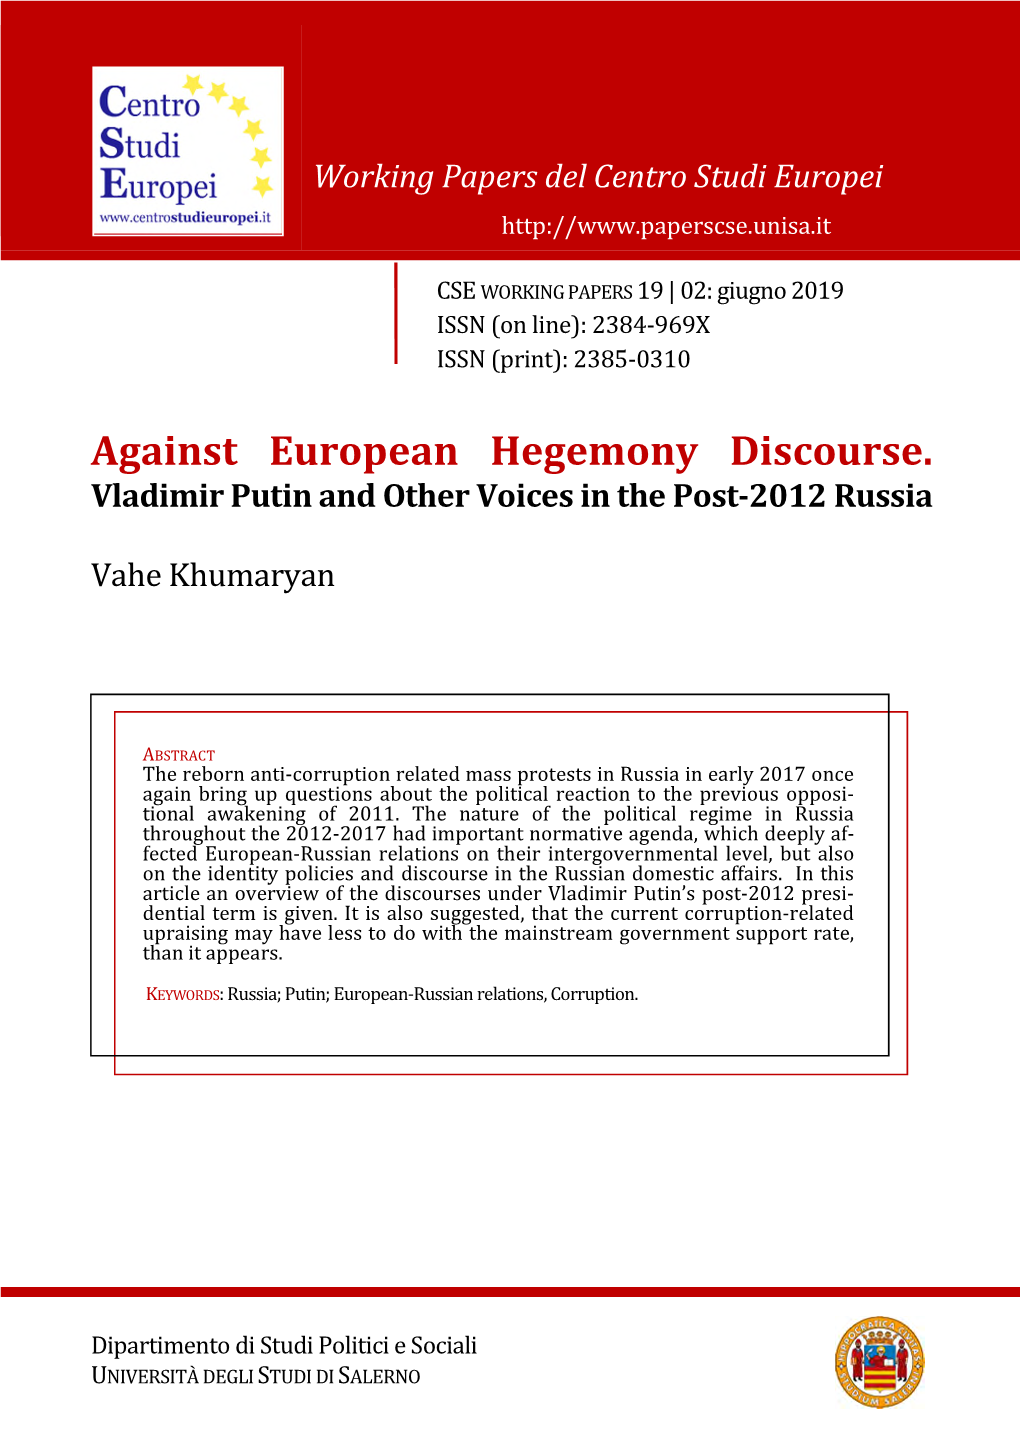 Against European Hegemony Discourse. Vladimir Putin and Other Voices in the Post-2012 Russia